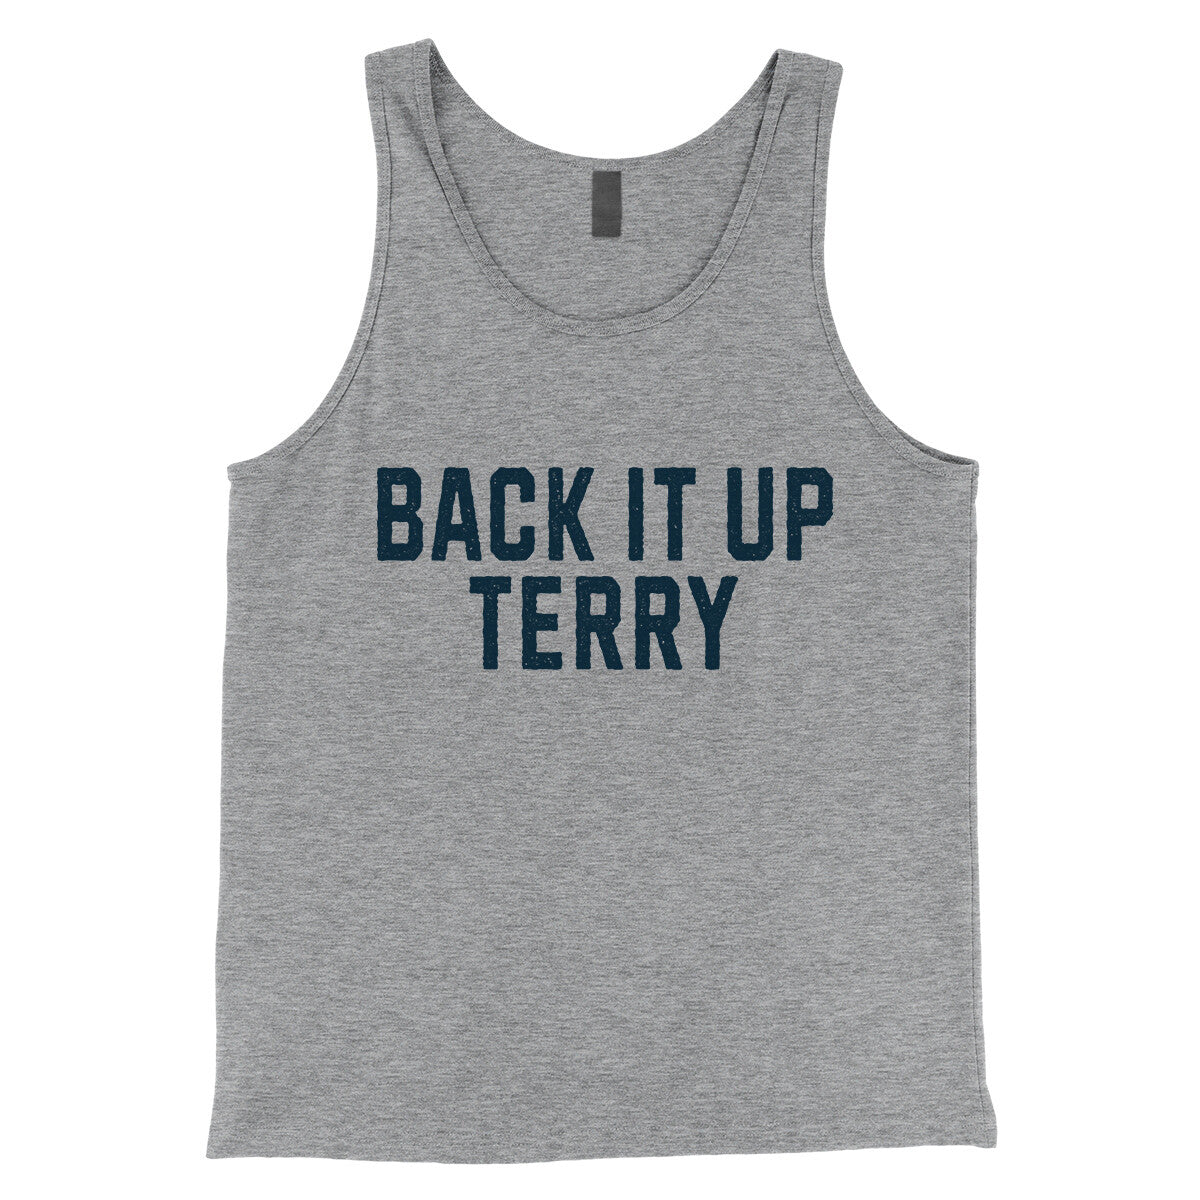 Back it up Terry in Athletic Heather Color